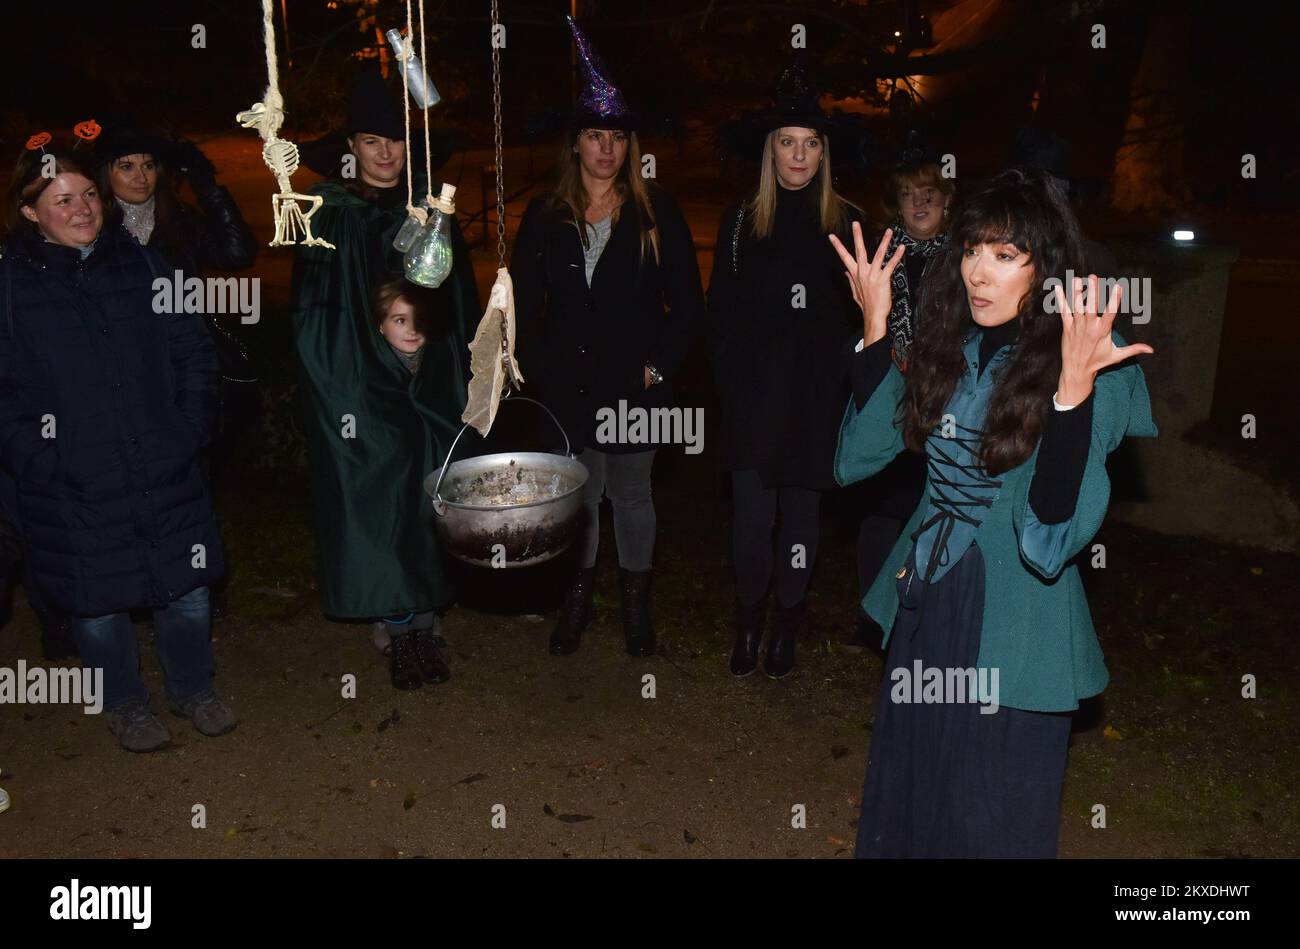 31.10.2019., Zagreb, Croatia - People dressed in witches in night tour called Uppertown witches. The Upper town witches is a night tour of the Upper Town and its landmarks with a costumed guide .It includes interactive elements and lively performers. Meet the dark side of Zagreb from the Middle Ages onwards through an entertaining programme, combining the witchcraft beliefs, the real practice and historical events in the background. Photo: Davorin Visnjic/PIXSELL Stock Photo